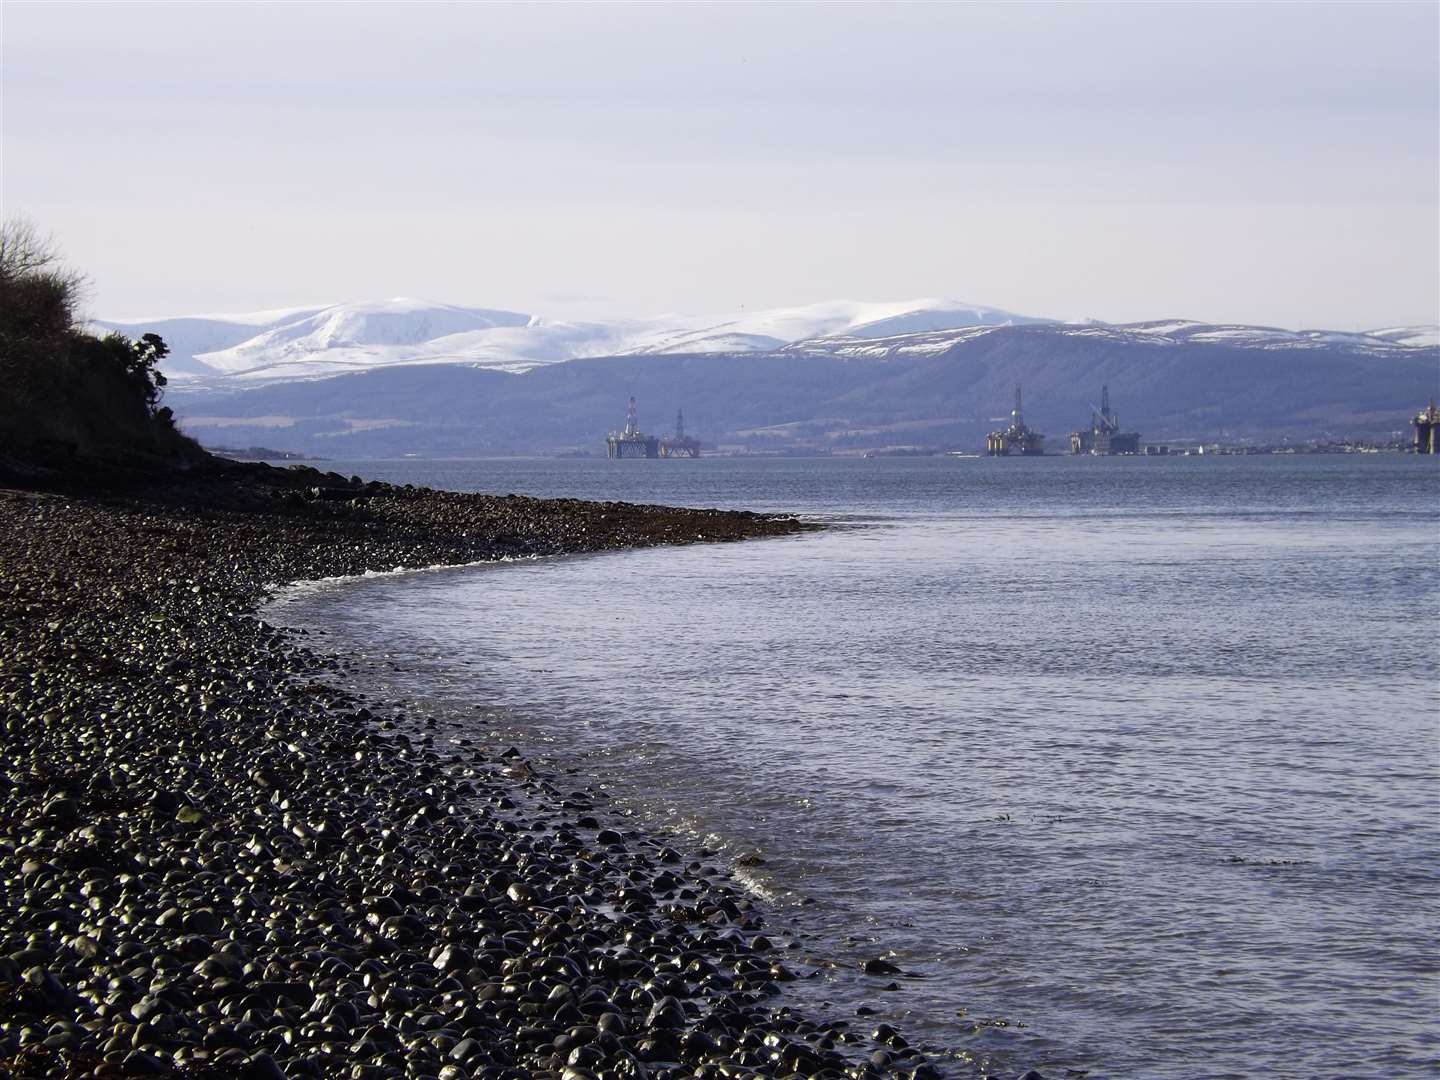 View across Cromarty Firth to Ben Wyvis. Harry Payne, Courier Country.